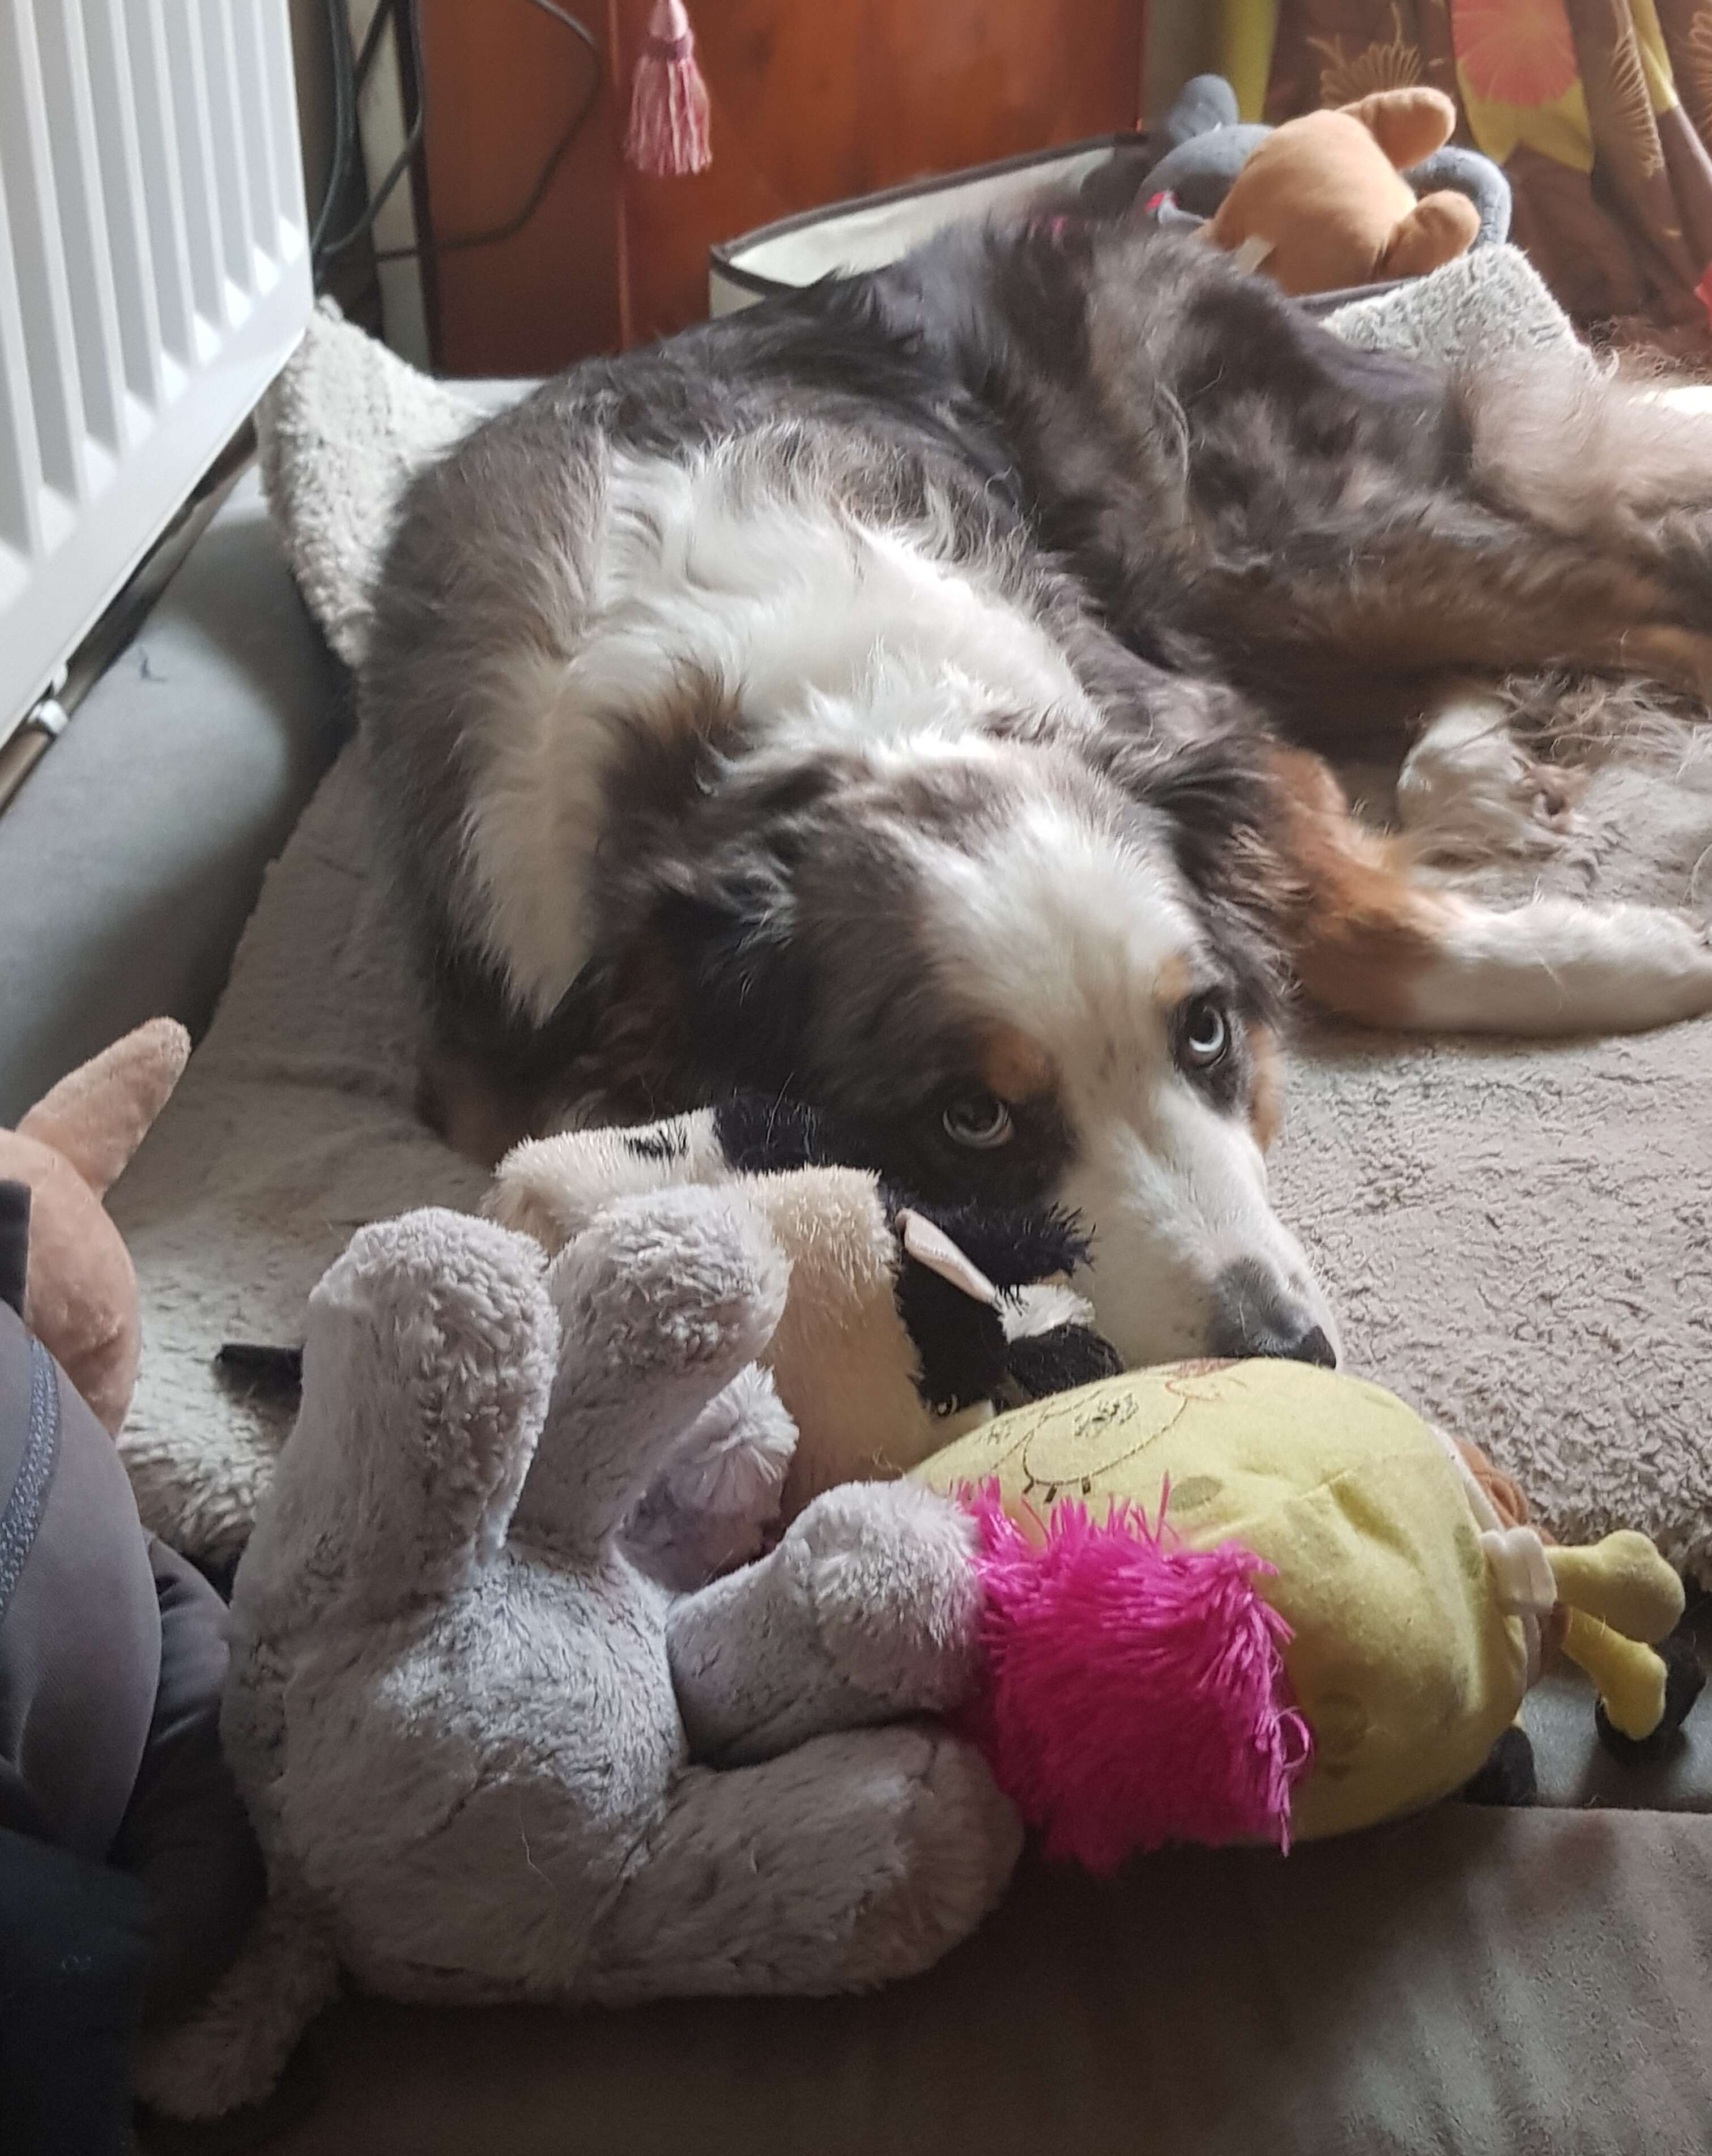 Mika snuggles with his toys